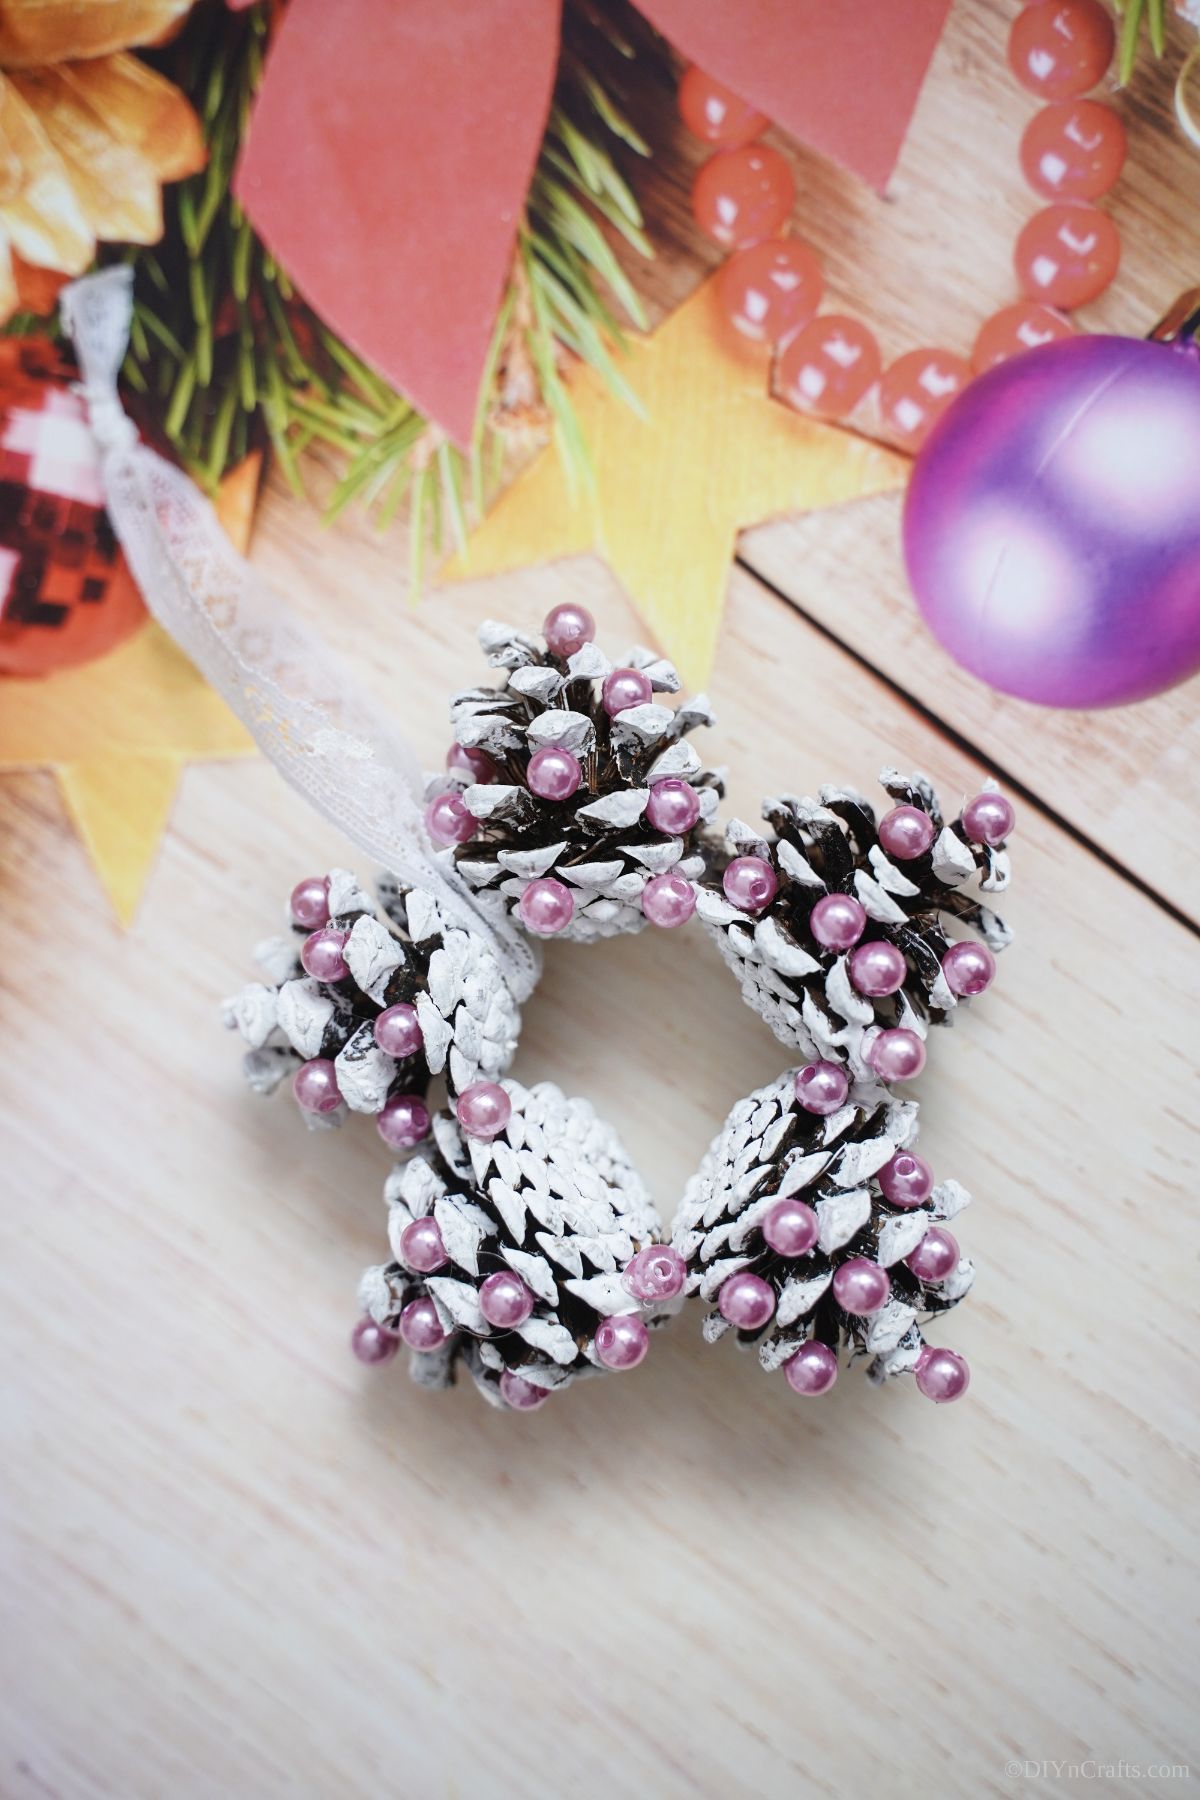 pinecone star ornament on cream holiday paper